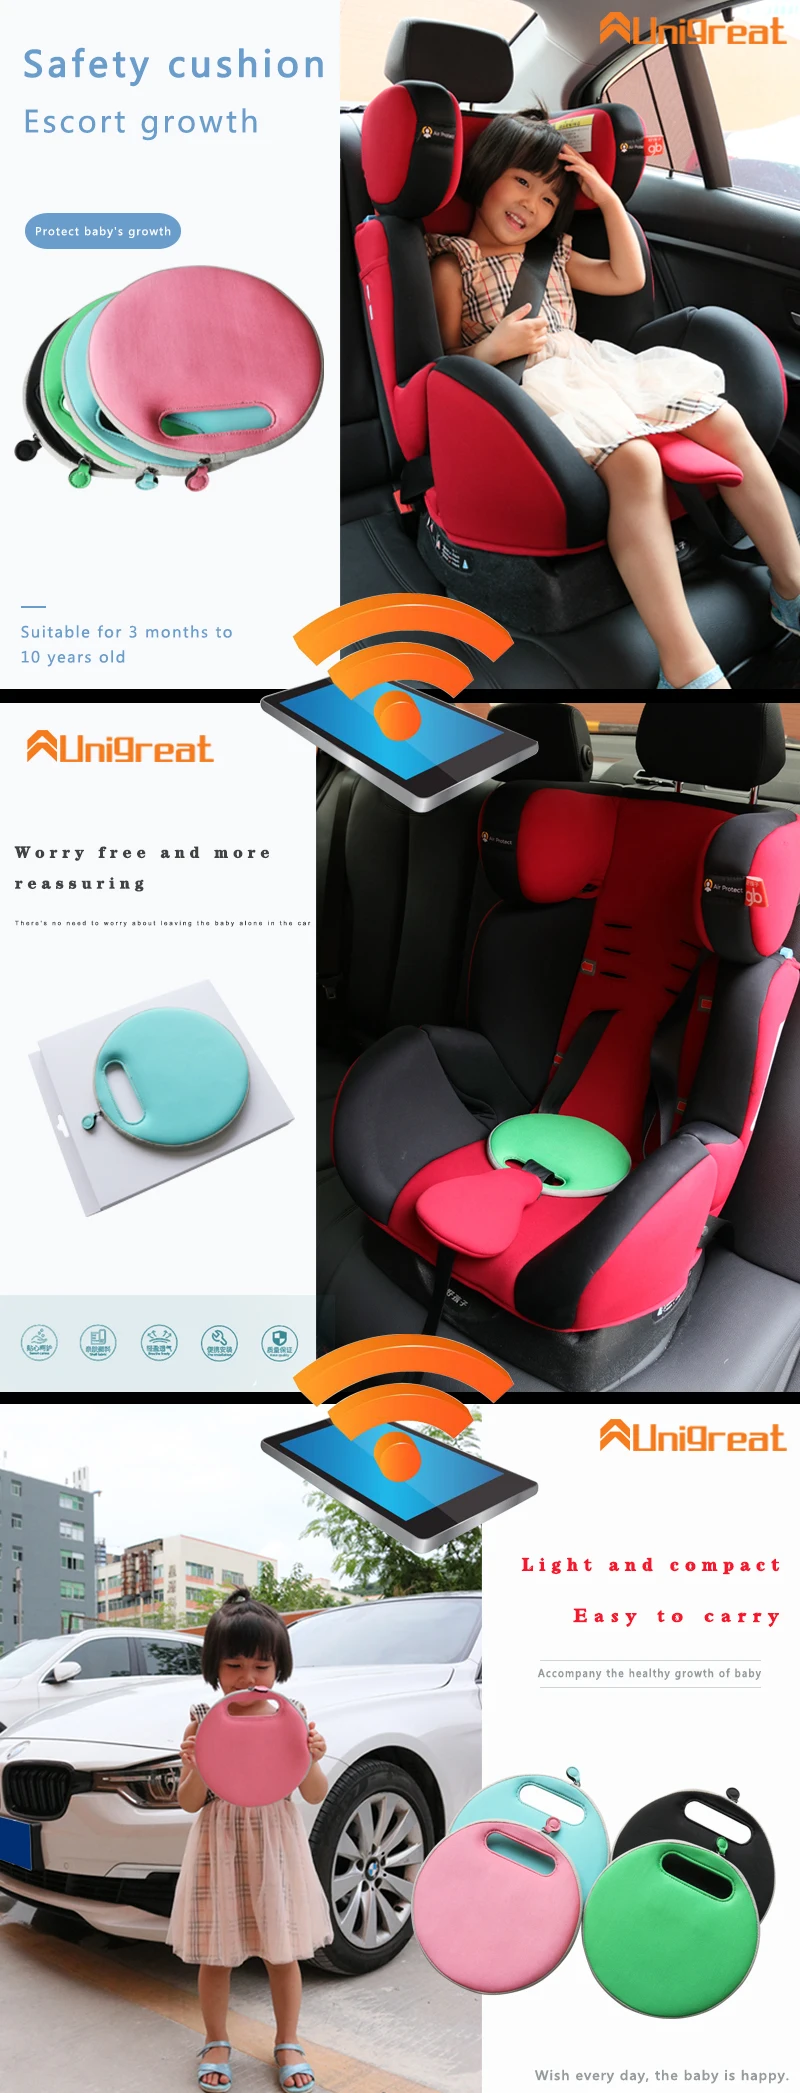 High Quality Baby Car Seat Alarm Safety Seat Car Baby Seat Alarm System Protect Your Child Safe Alert Baby Reminder